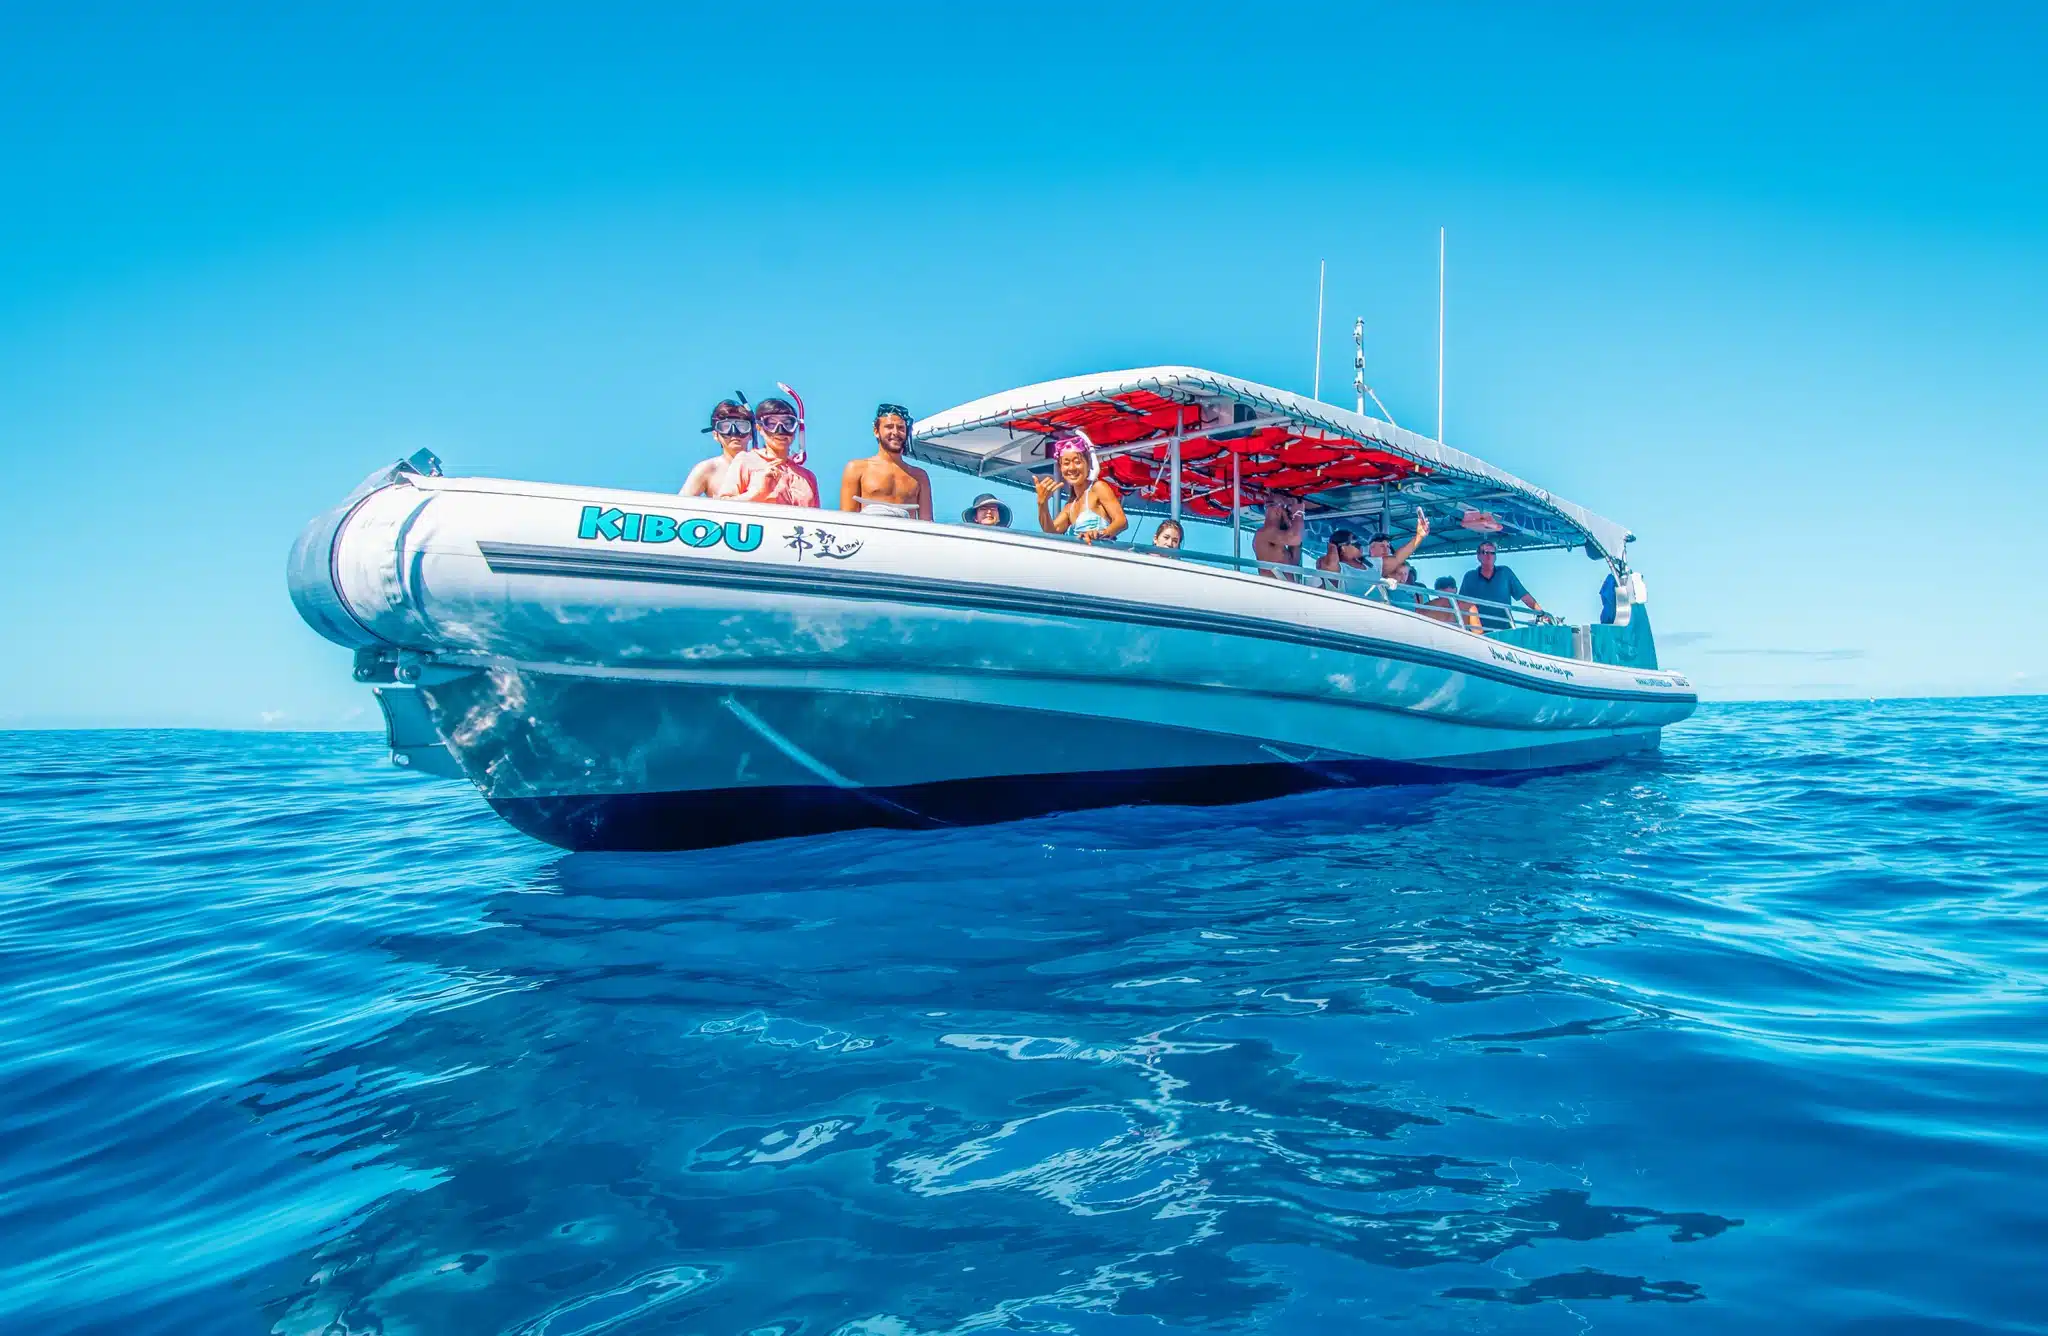 Kona Dolphin Watch Double Snorkel Tour is a Water Activity located in the city of Kailua-Kona on Big Island, Hawaii